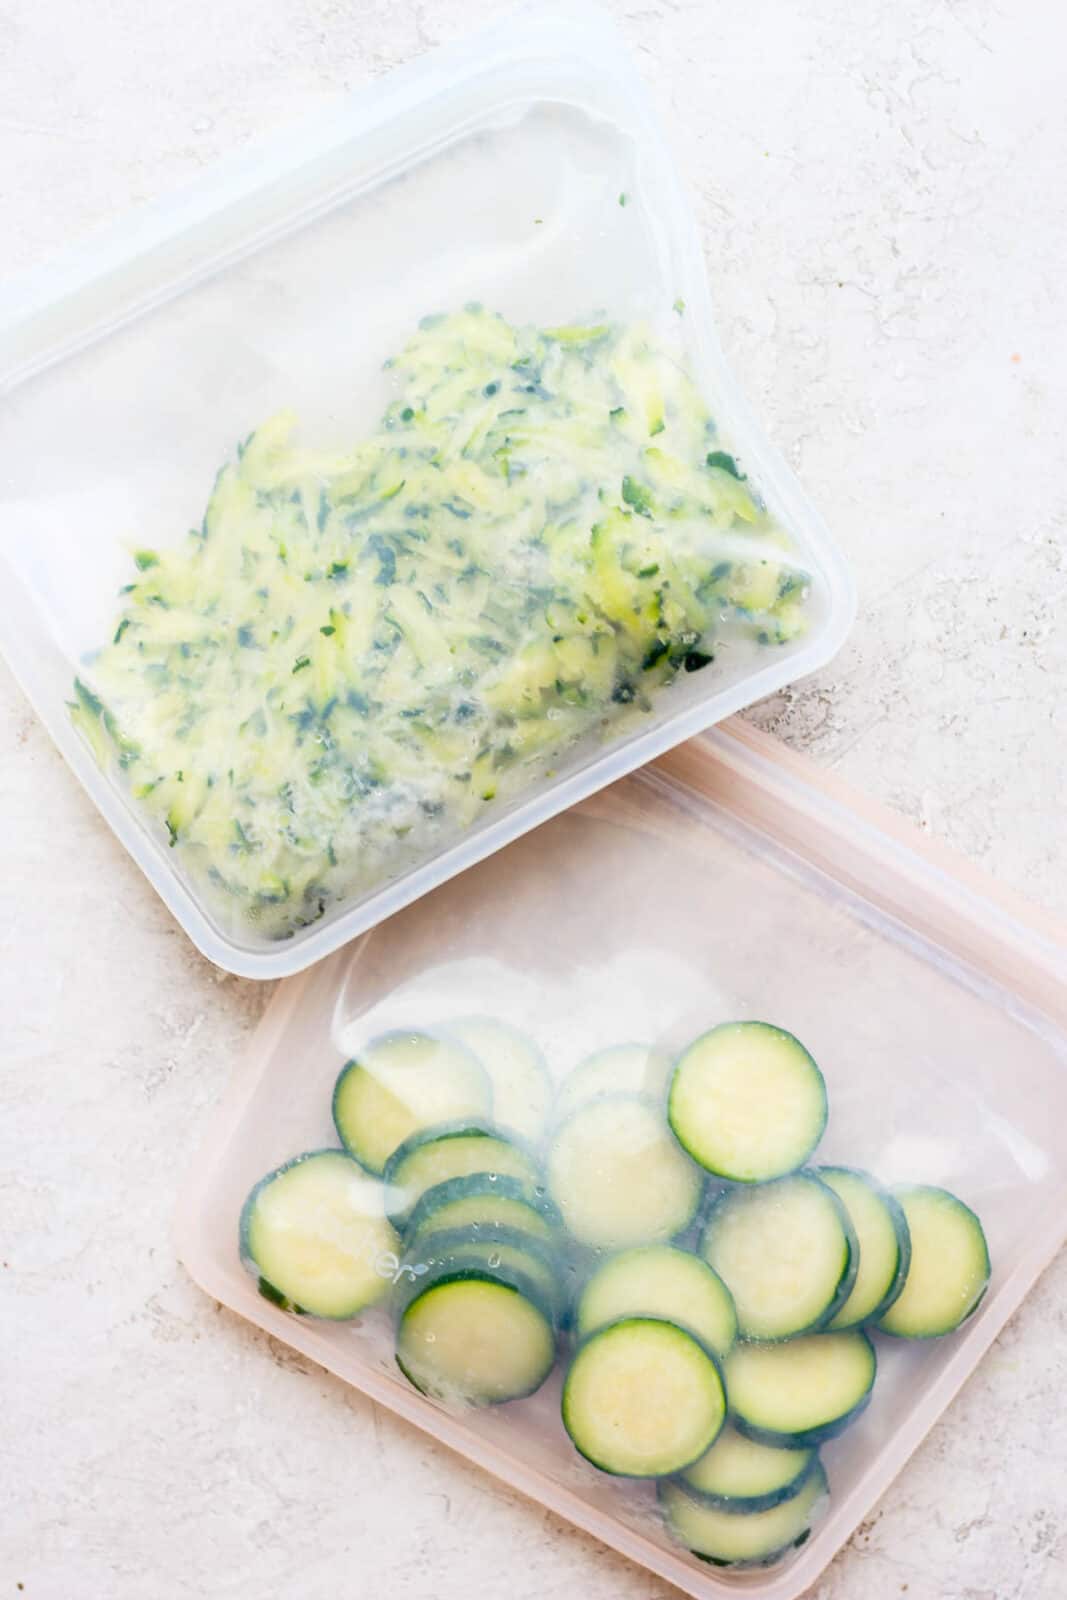 One bag of frozen shredded zucchini and a bag of frozen zucchini slices. 